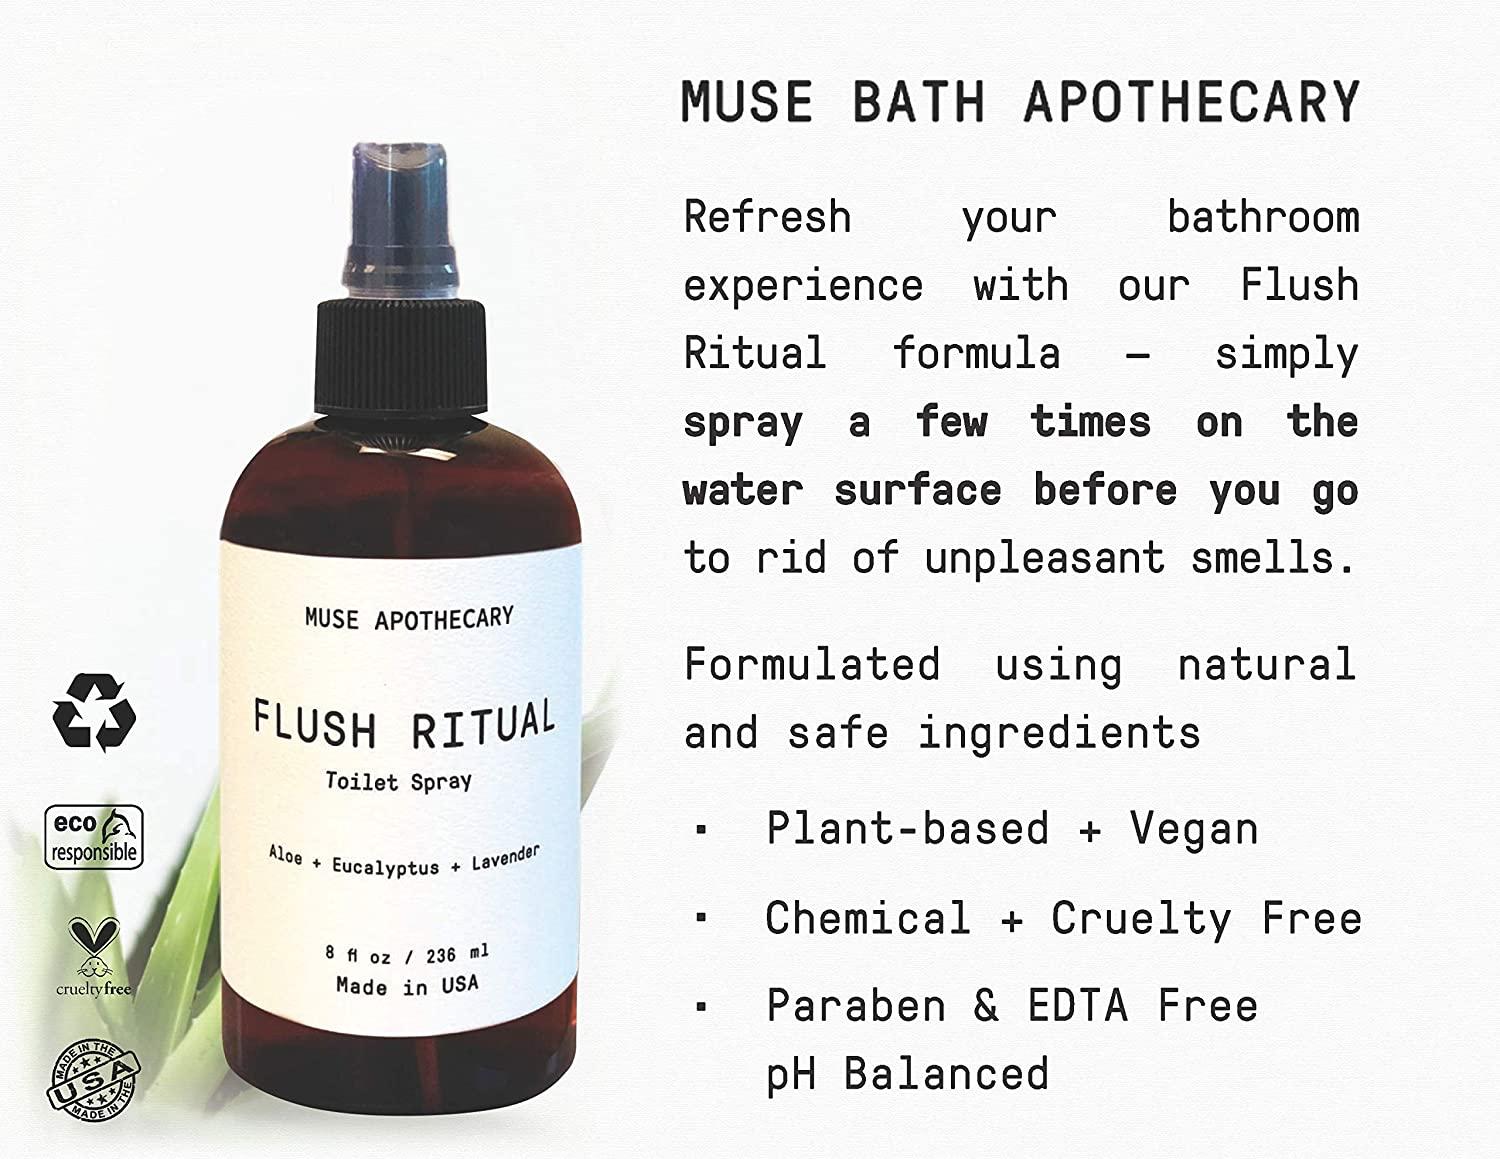 Muse Bath Apothecary Yoga Ritual - Aromatic and Refreshing Yoga Mat  Cleaner, 8 oz, Infused with Natural Essential Oils - Eucalyptus Mint, 2 Pack